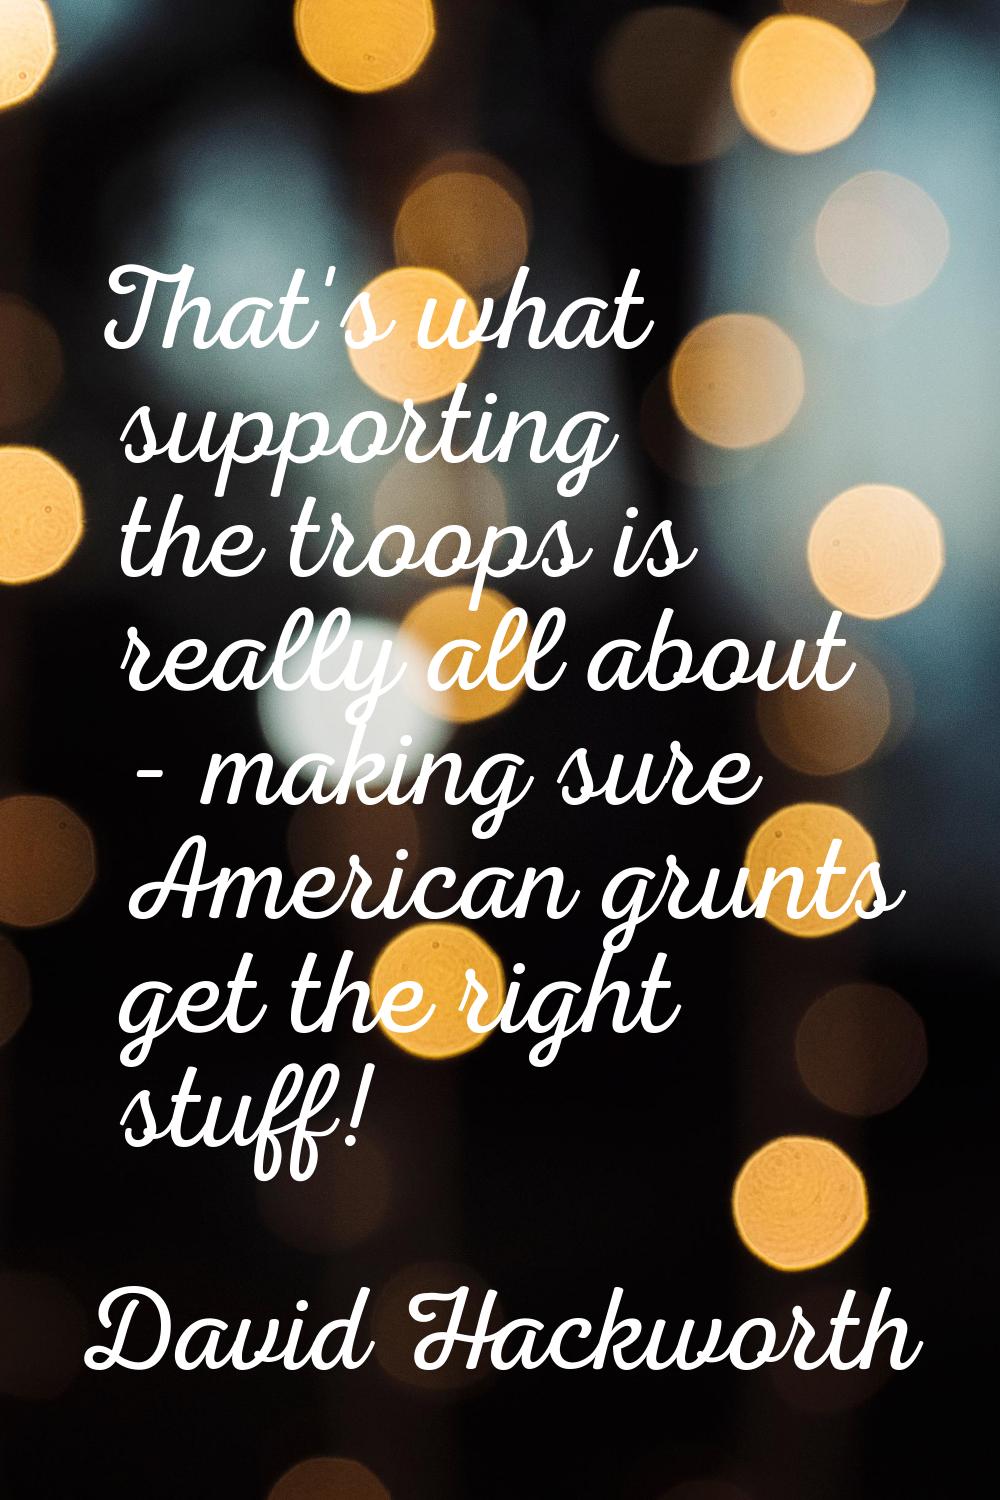 That's what supporting the troops is really all about - making sure American grunts get the right s